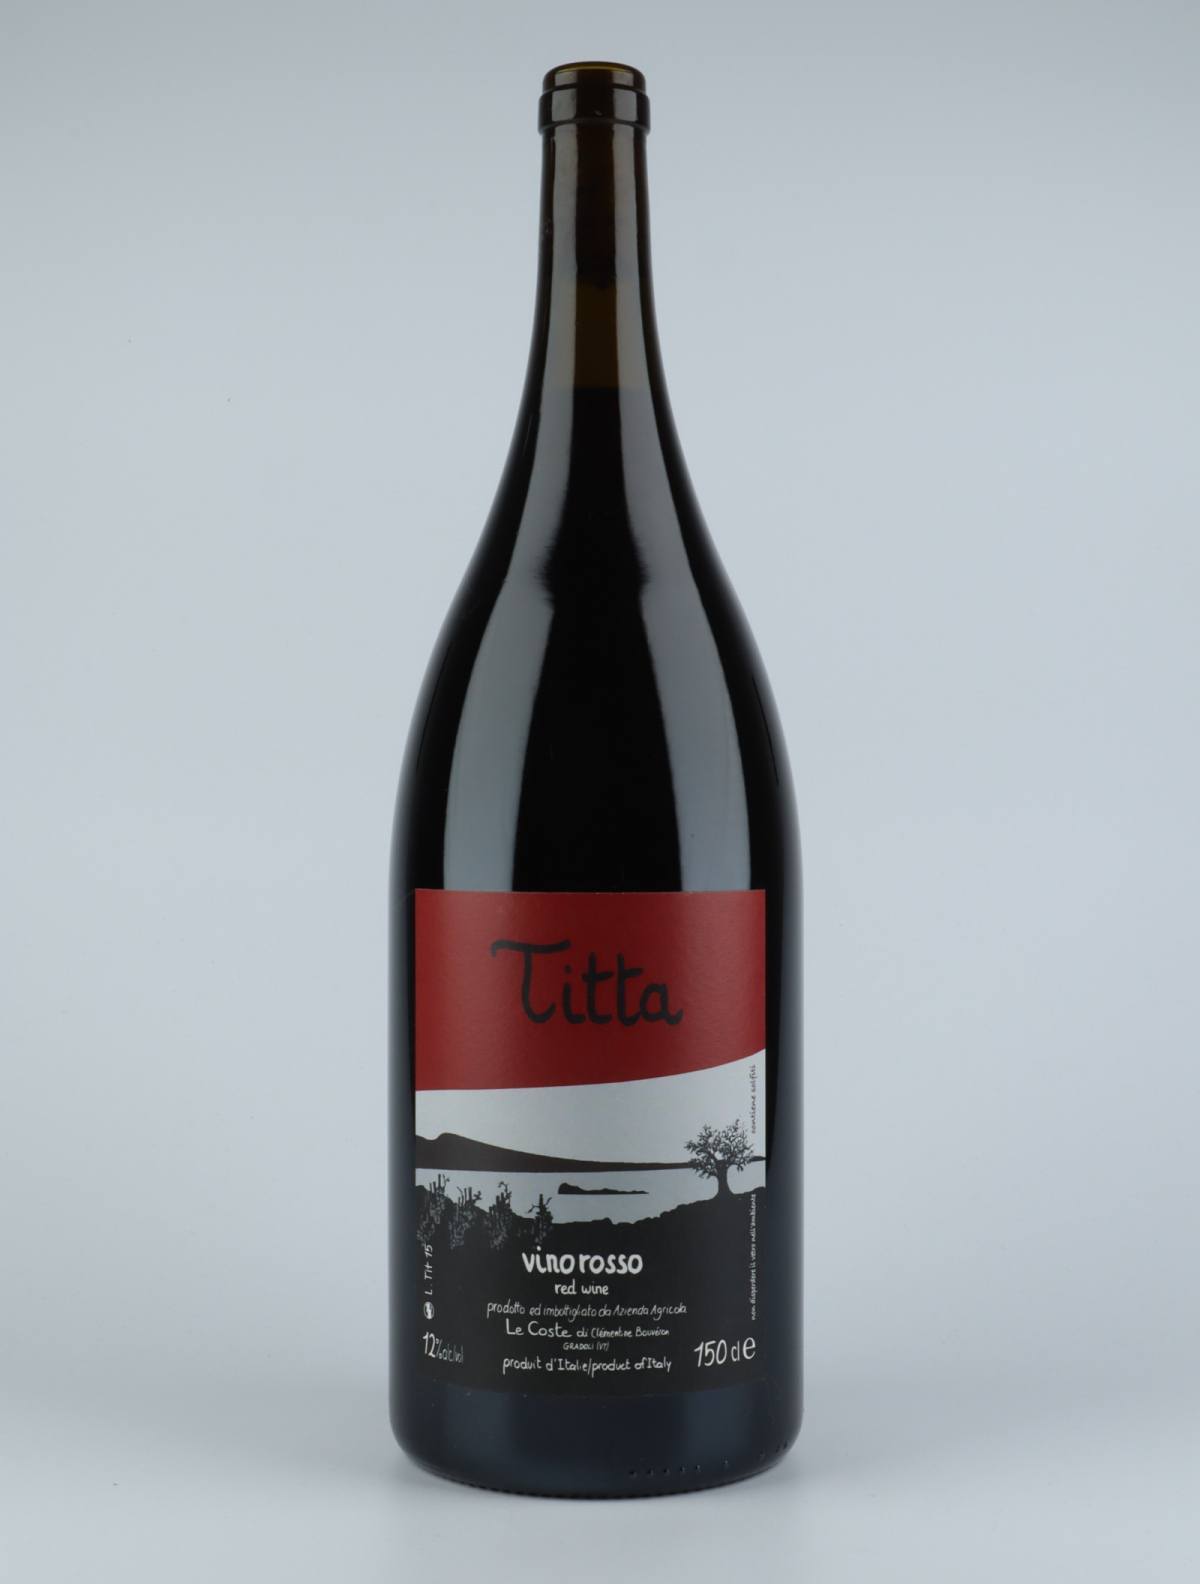 A bottle 2015 Titta Red wine from Le Coste, Lazio in Italy